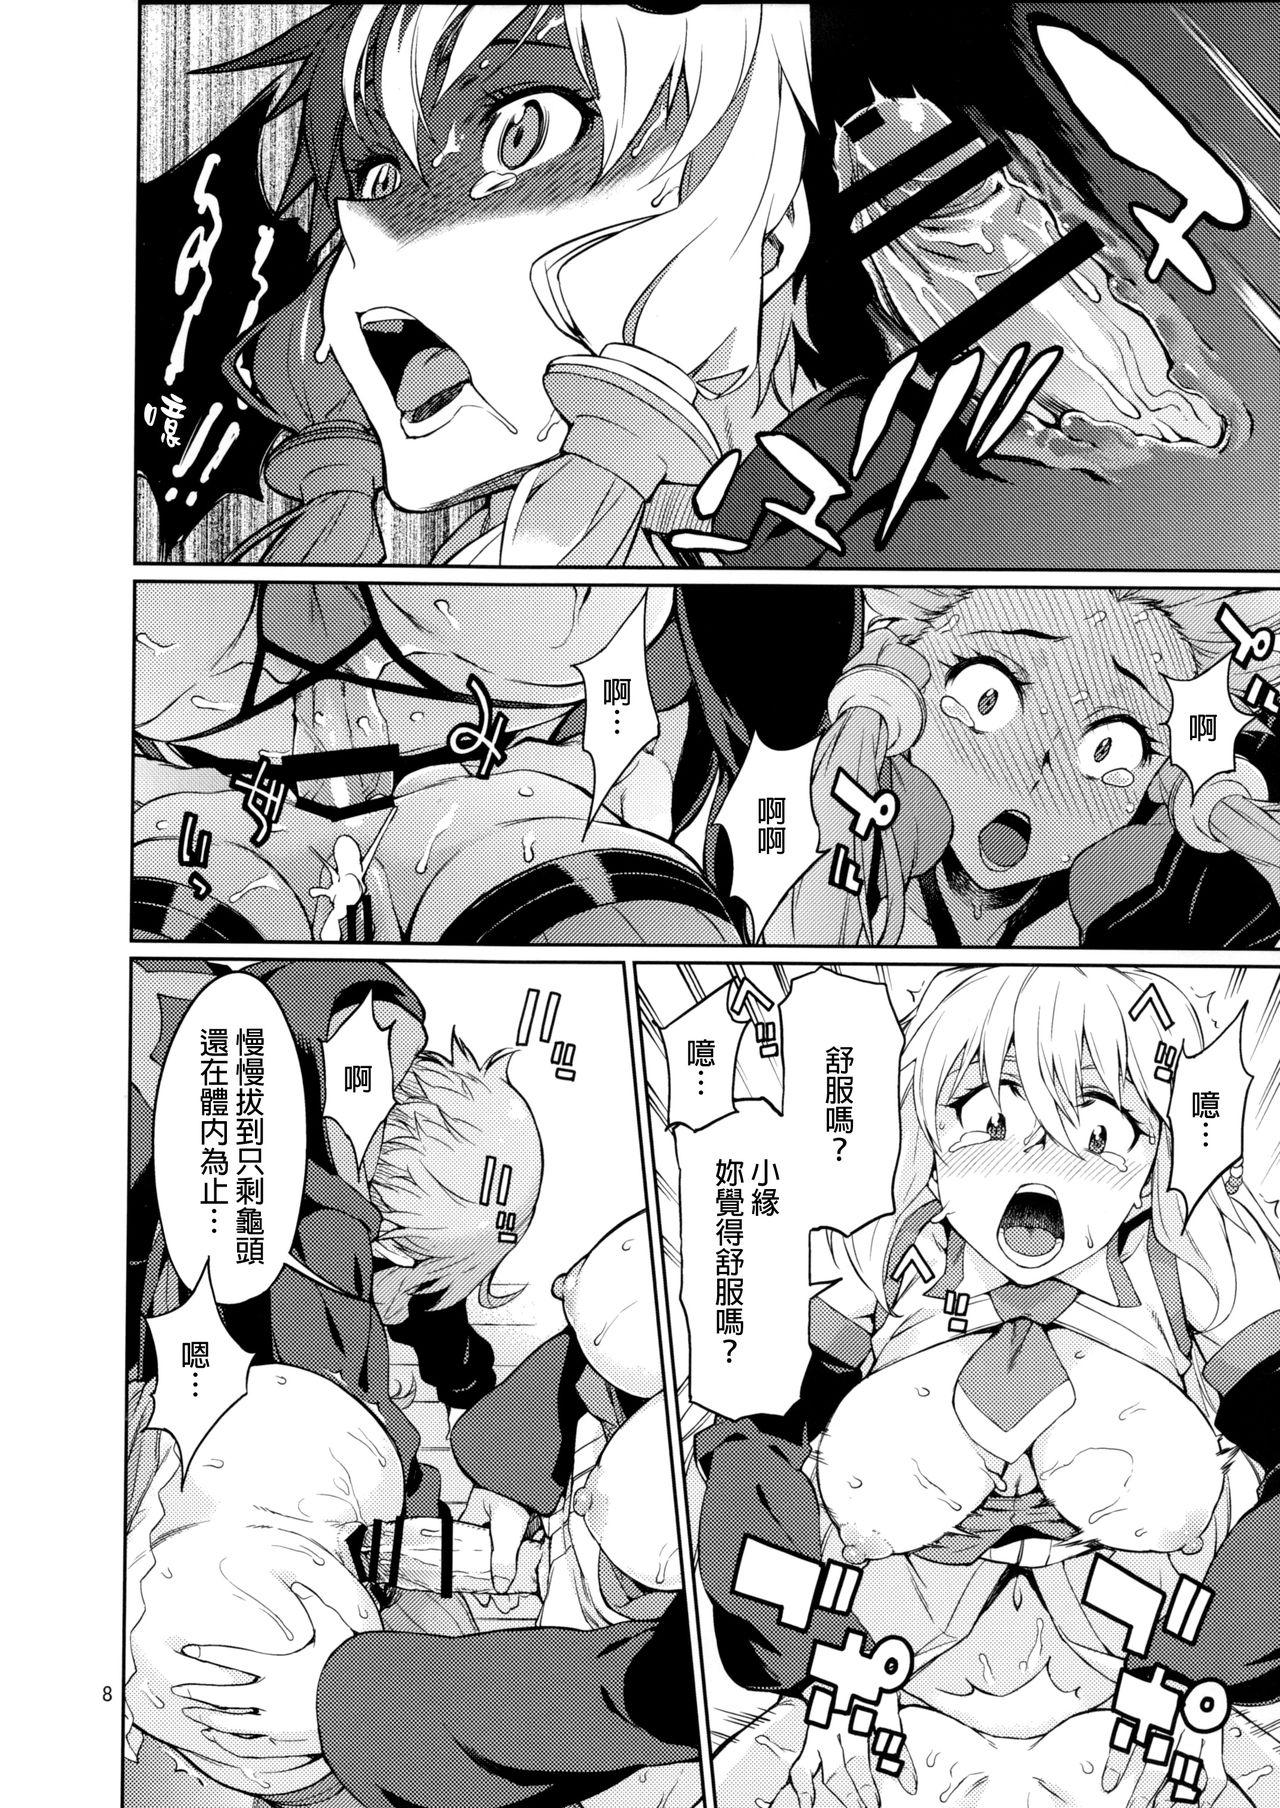 Moms Y - Vocaloid Wet Pussy - Page 9